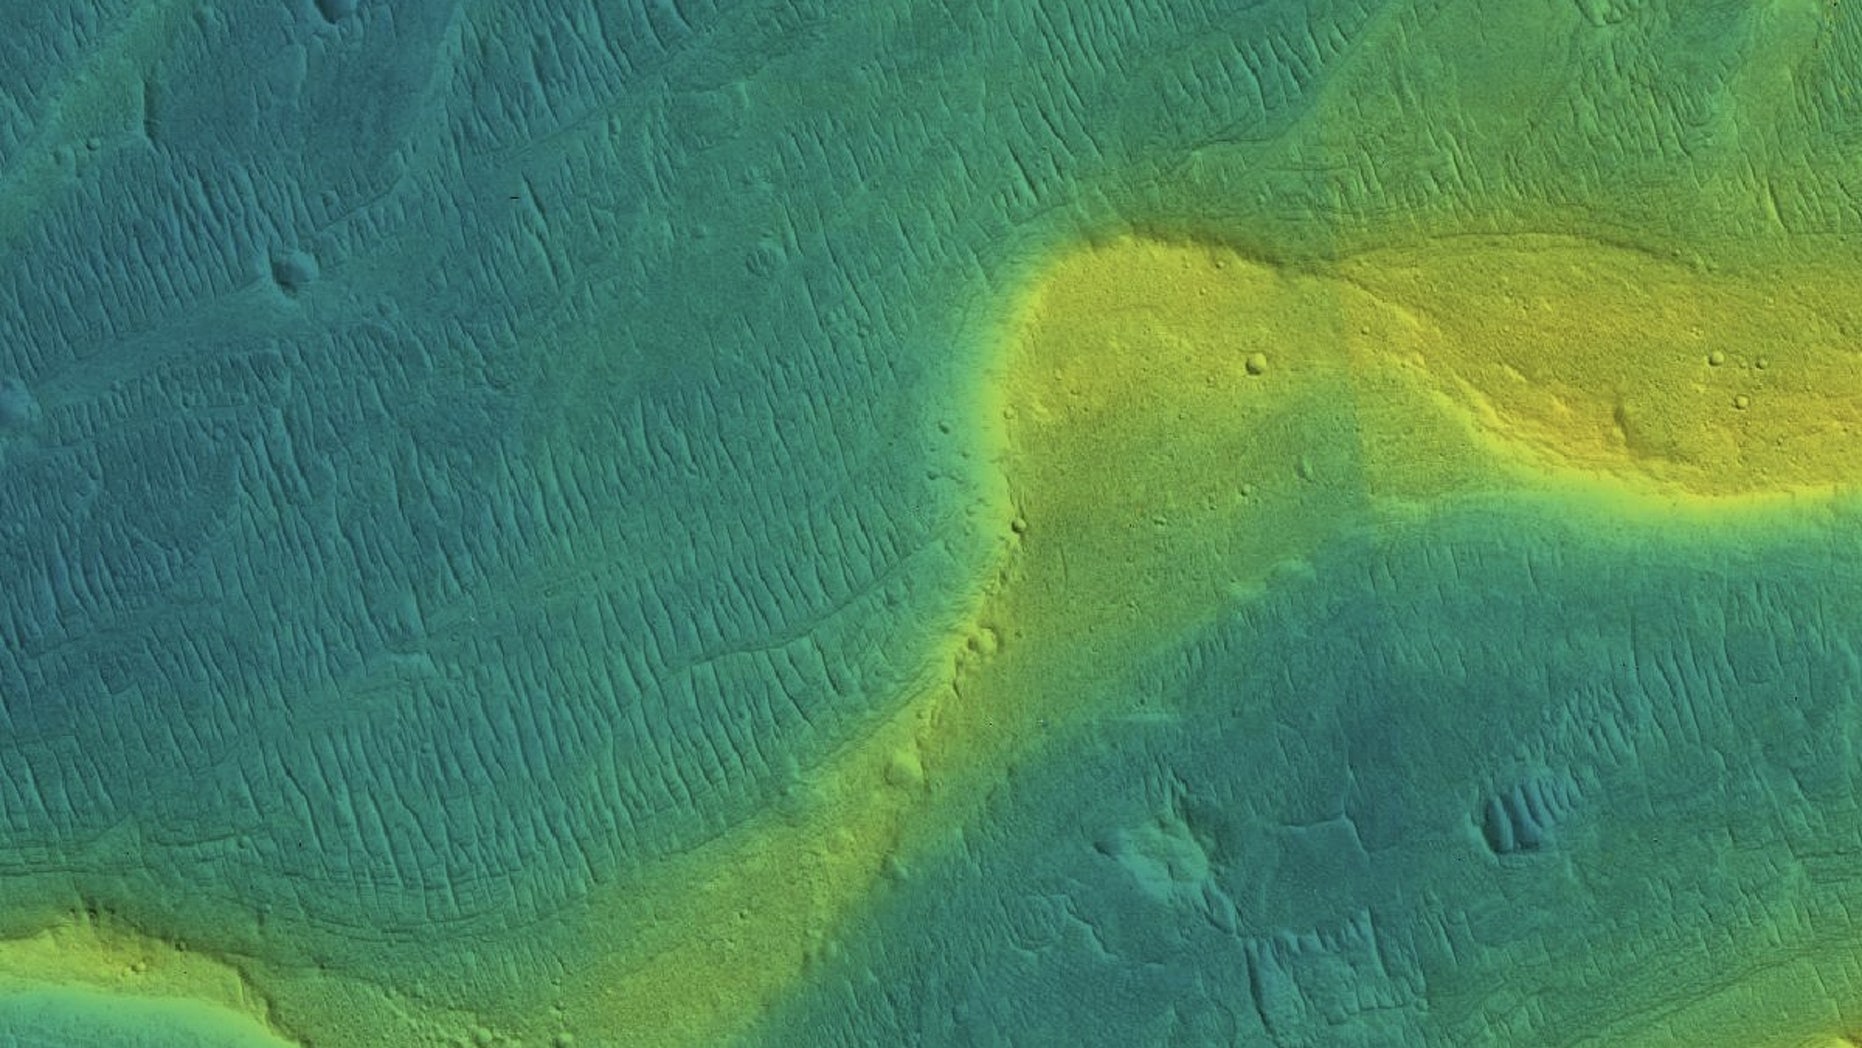 This NASA image shows a preserved river channel on Mars, with colors superimposed to indicate elevation (blue is low, yellow is high). The elevation range in the snapshot is about 35 meters.